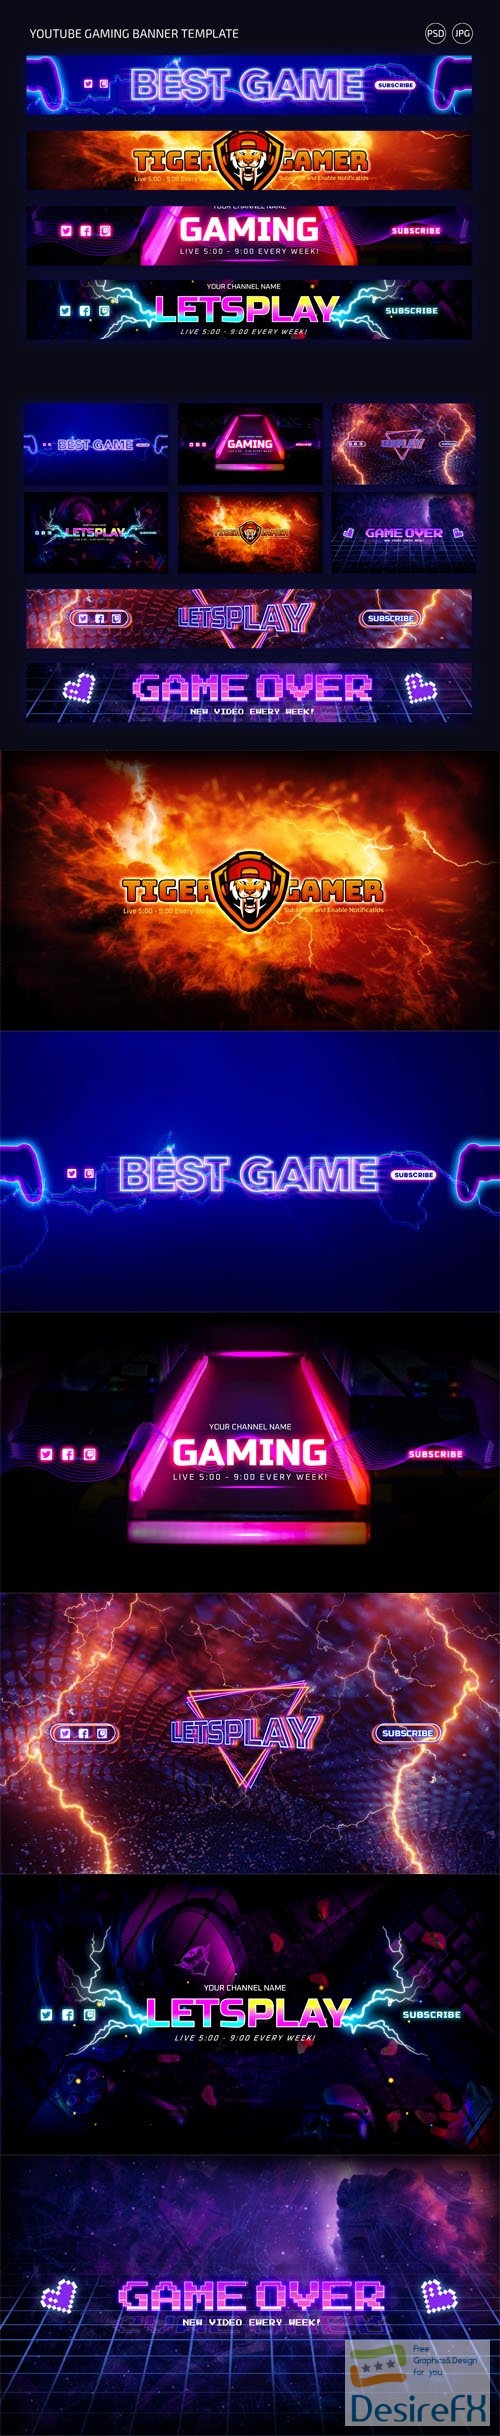 Youtube Gaming Banners PSD Templates